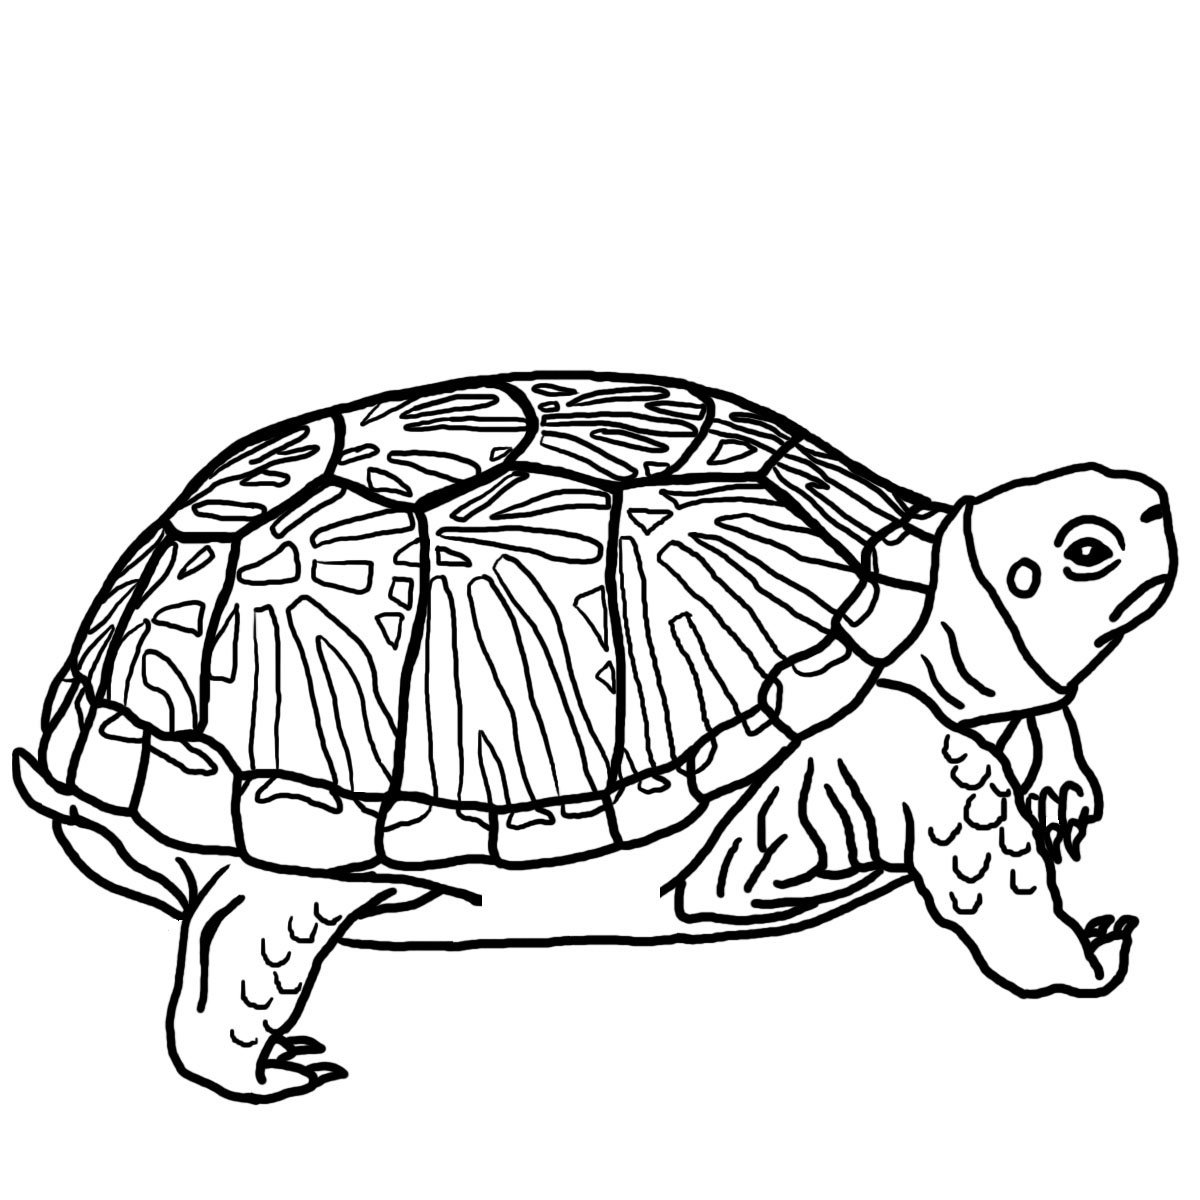 594 Cartoon Coloring Pages For Kids Turtle with Animal character